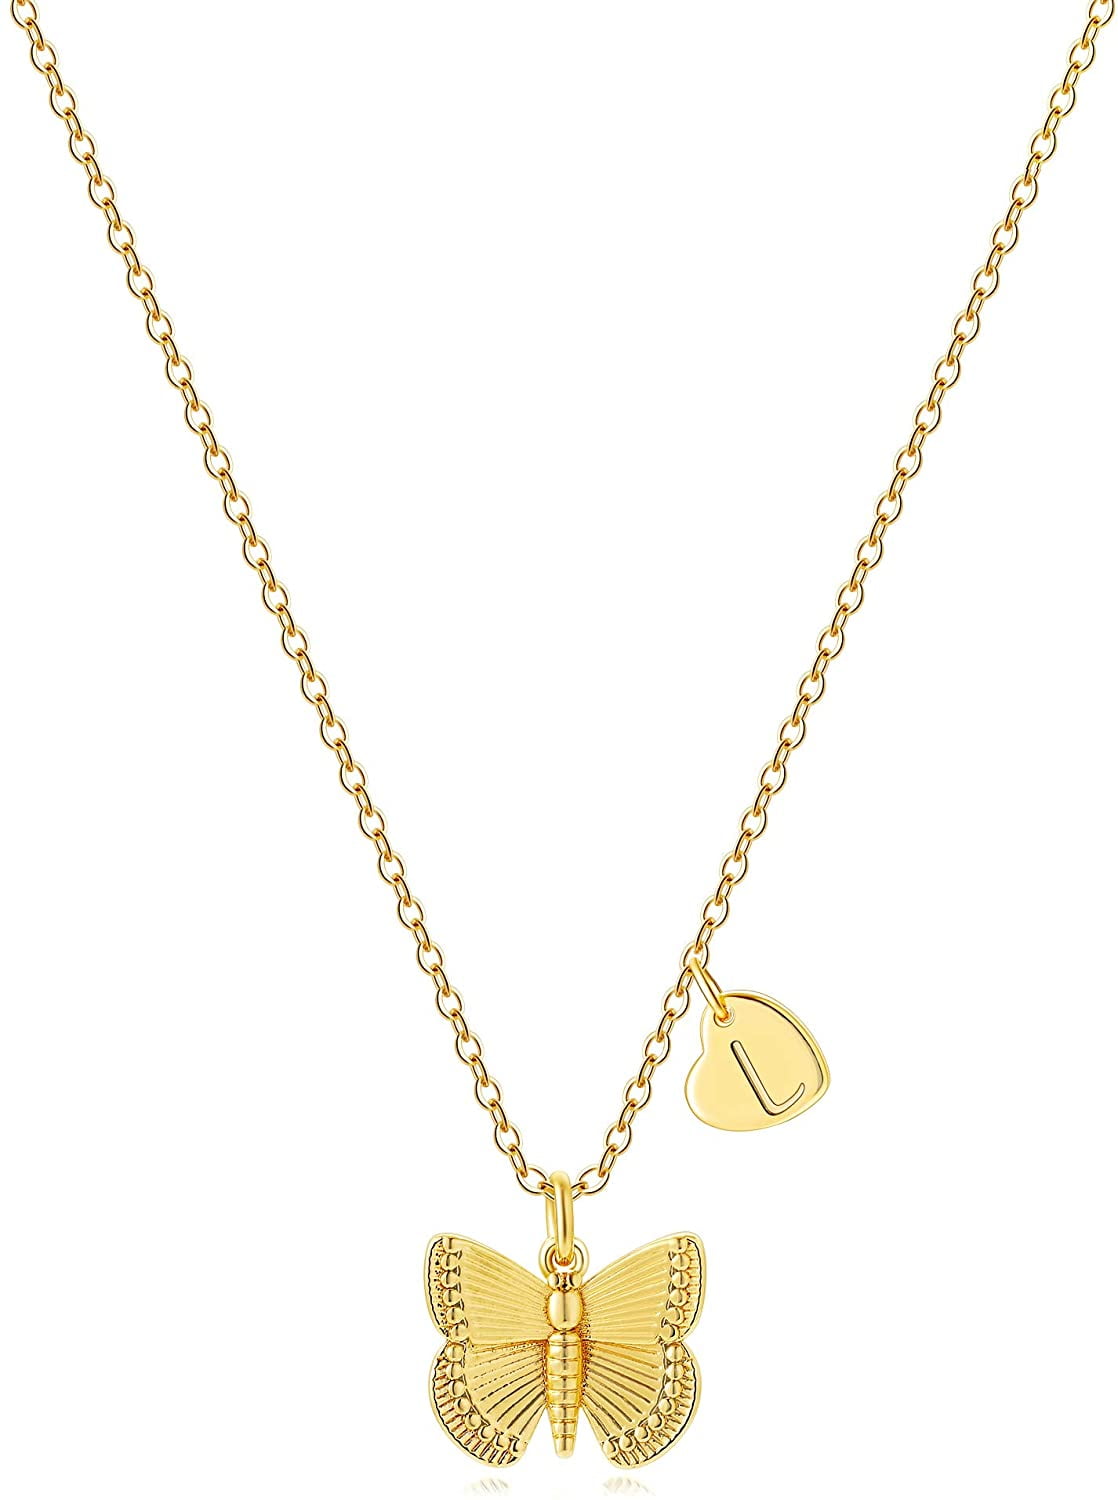 Details about   New Real Solid 14K Gold Love Butterfly Charm Pendant 